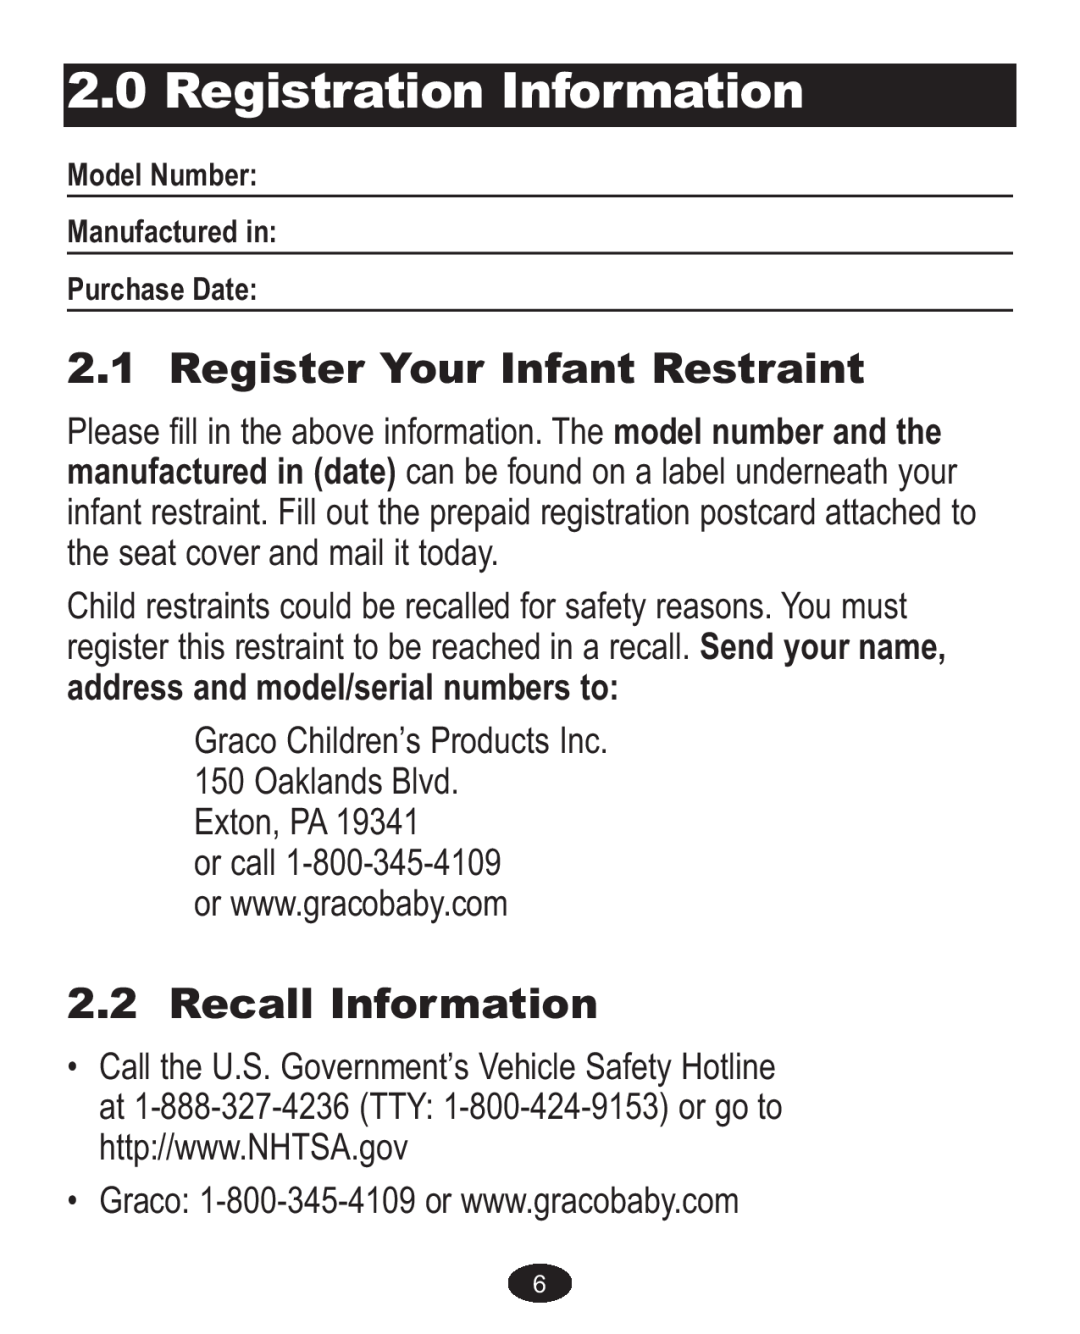 Graco ISPA338AA owner manual Registration Information, Register Your Infant Restraint, Recall Information 